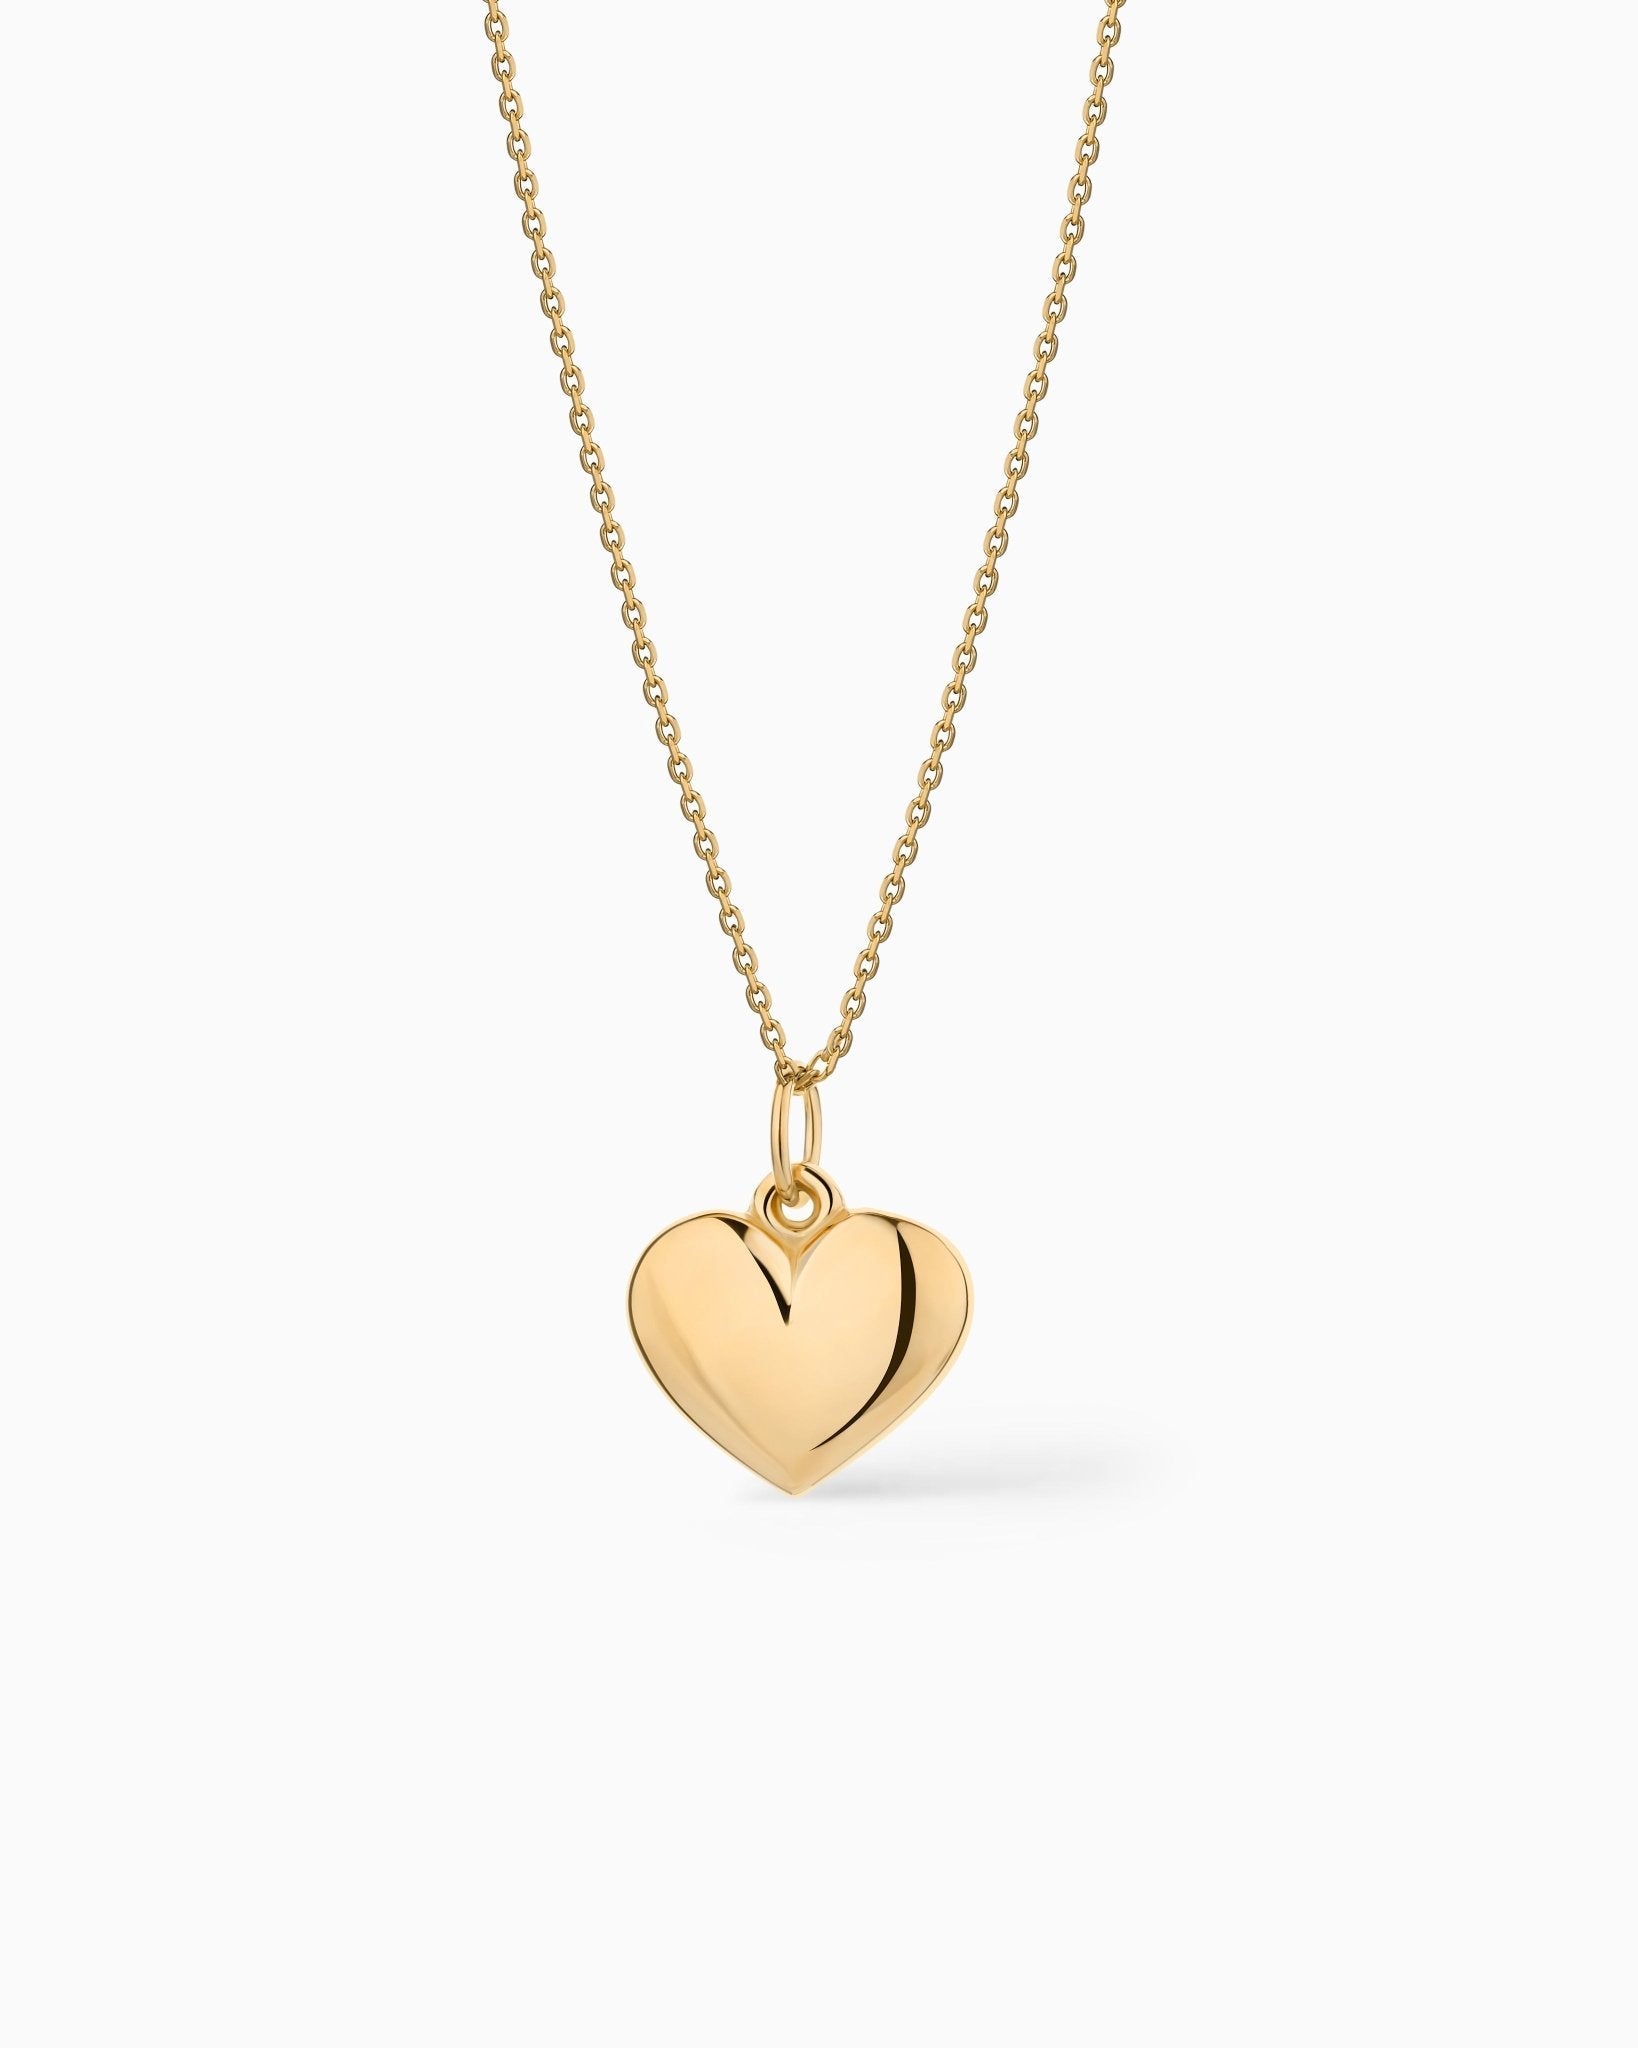 Heartbreaking - Sa Pasé - Sterling Silver | 18K Gold Plating